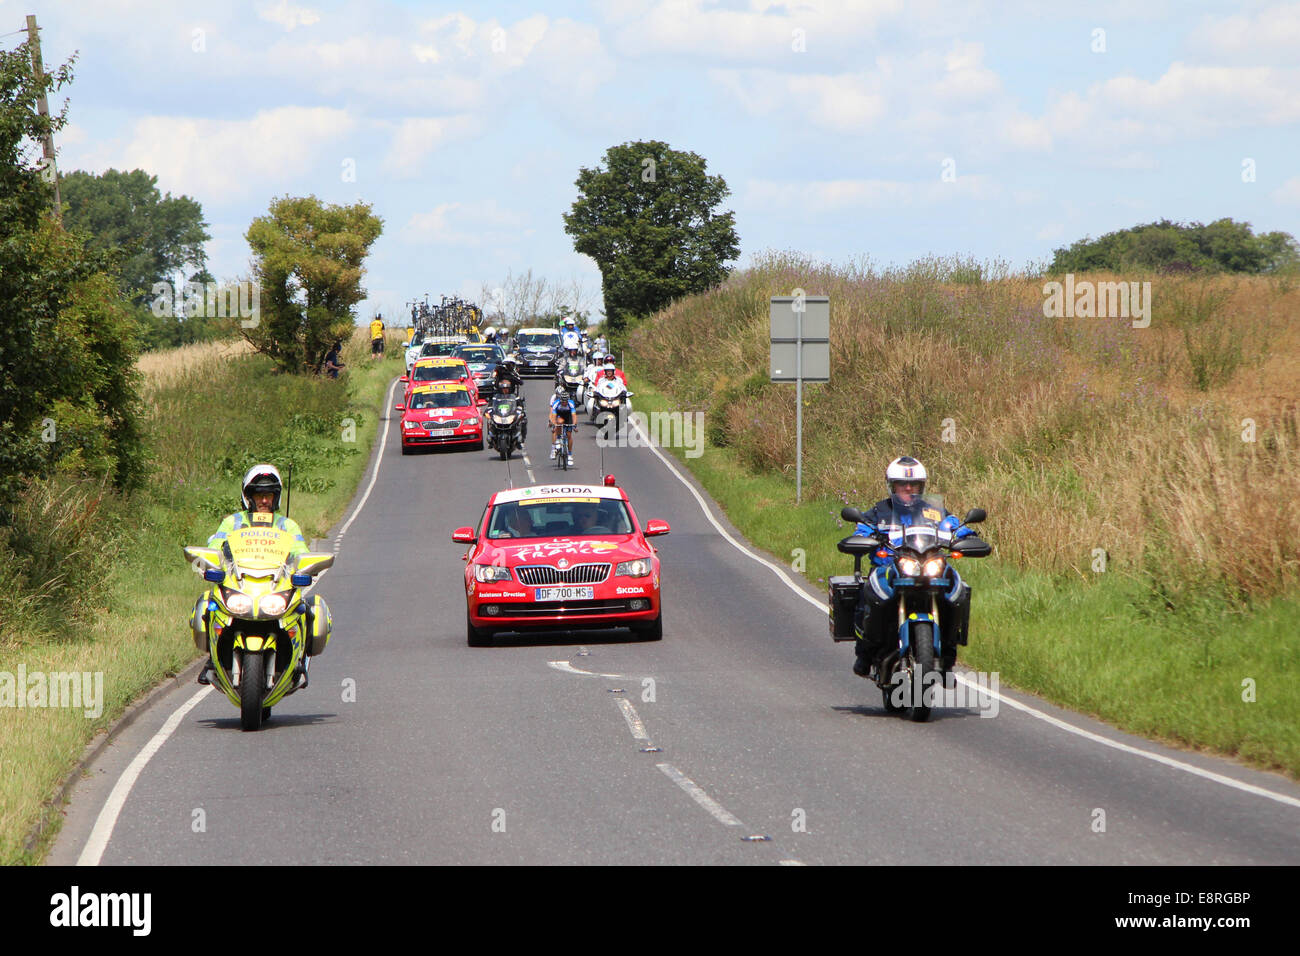 The head of the Tour de France 2014 convoy approaches Saffron Walden, Essex, UK, during stage 3 of the race. Stock Photo